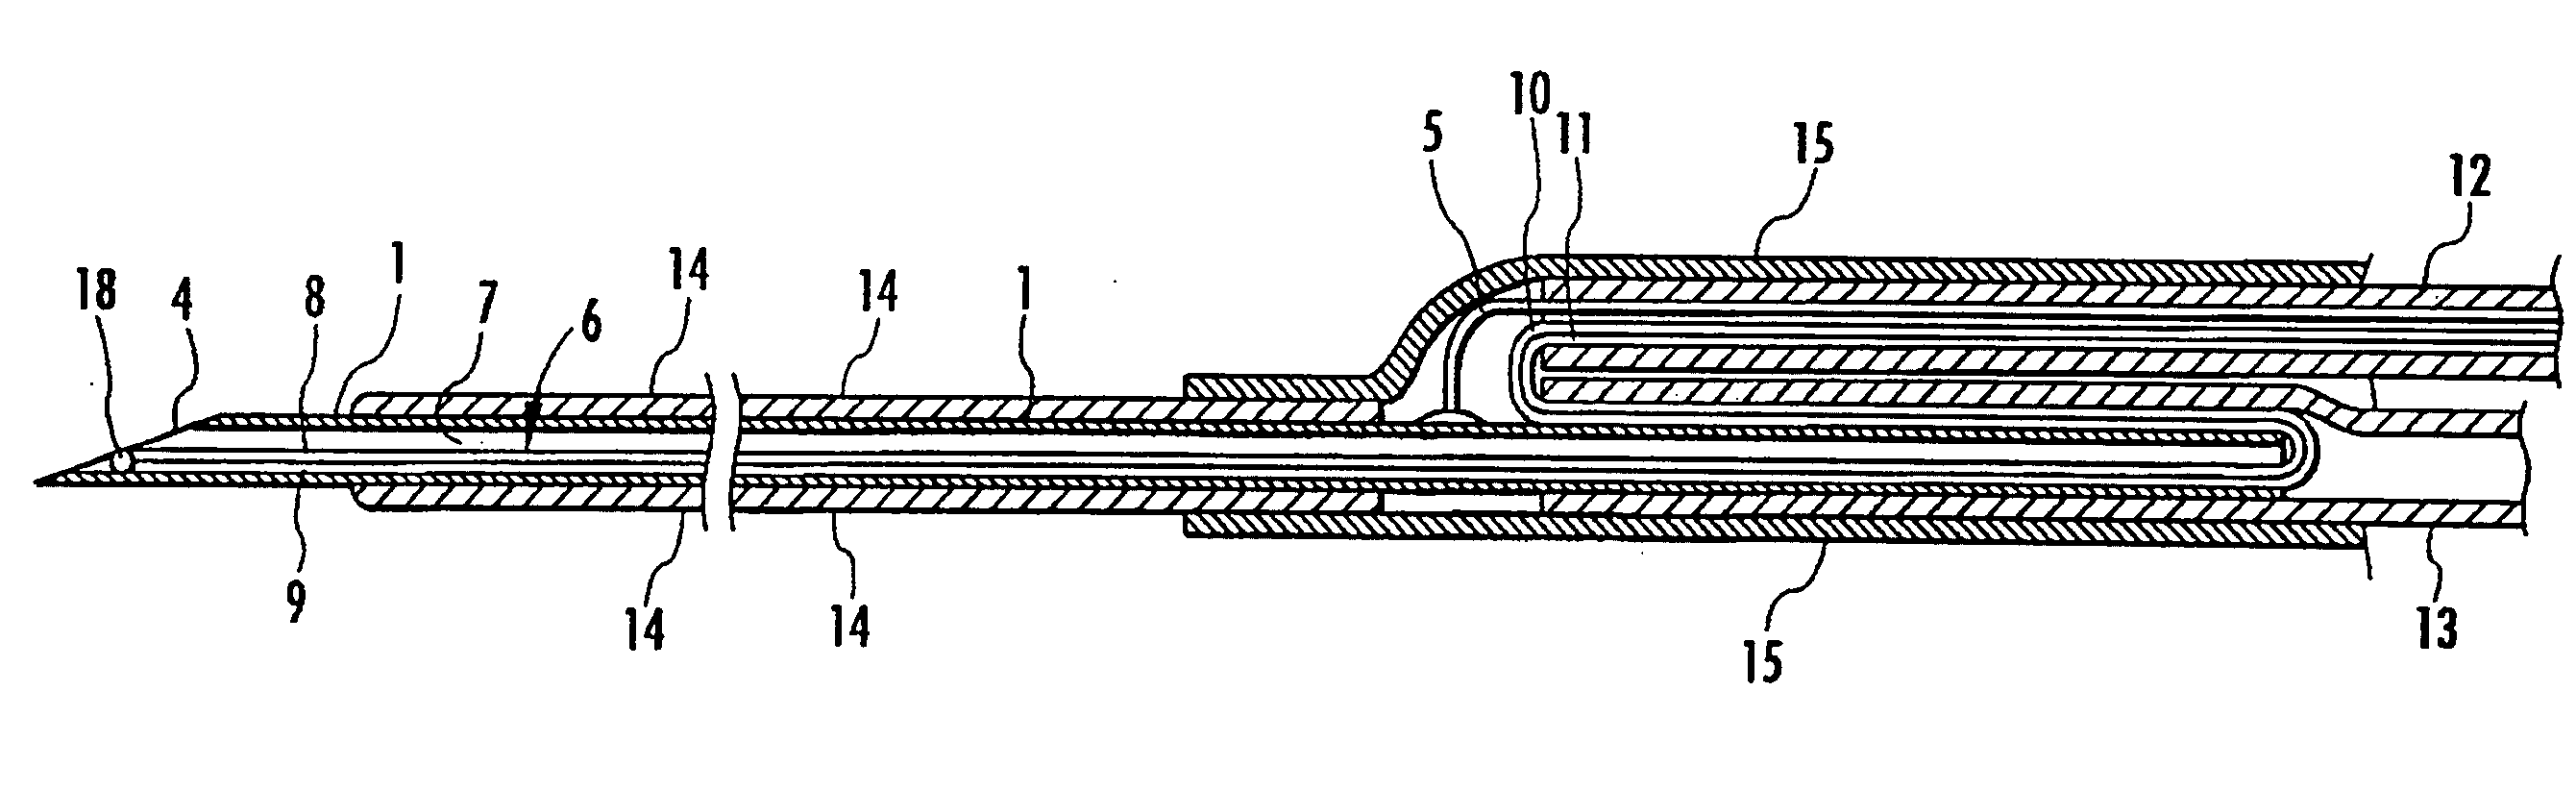 Needle electrode device for medical application